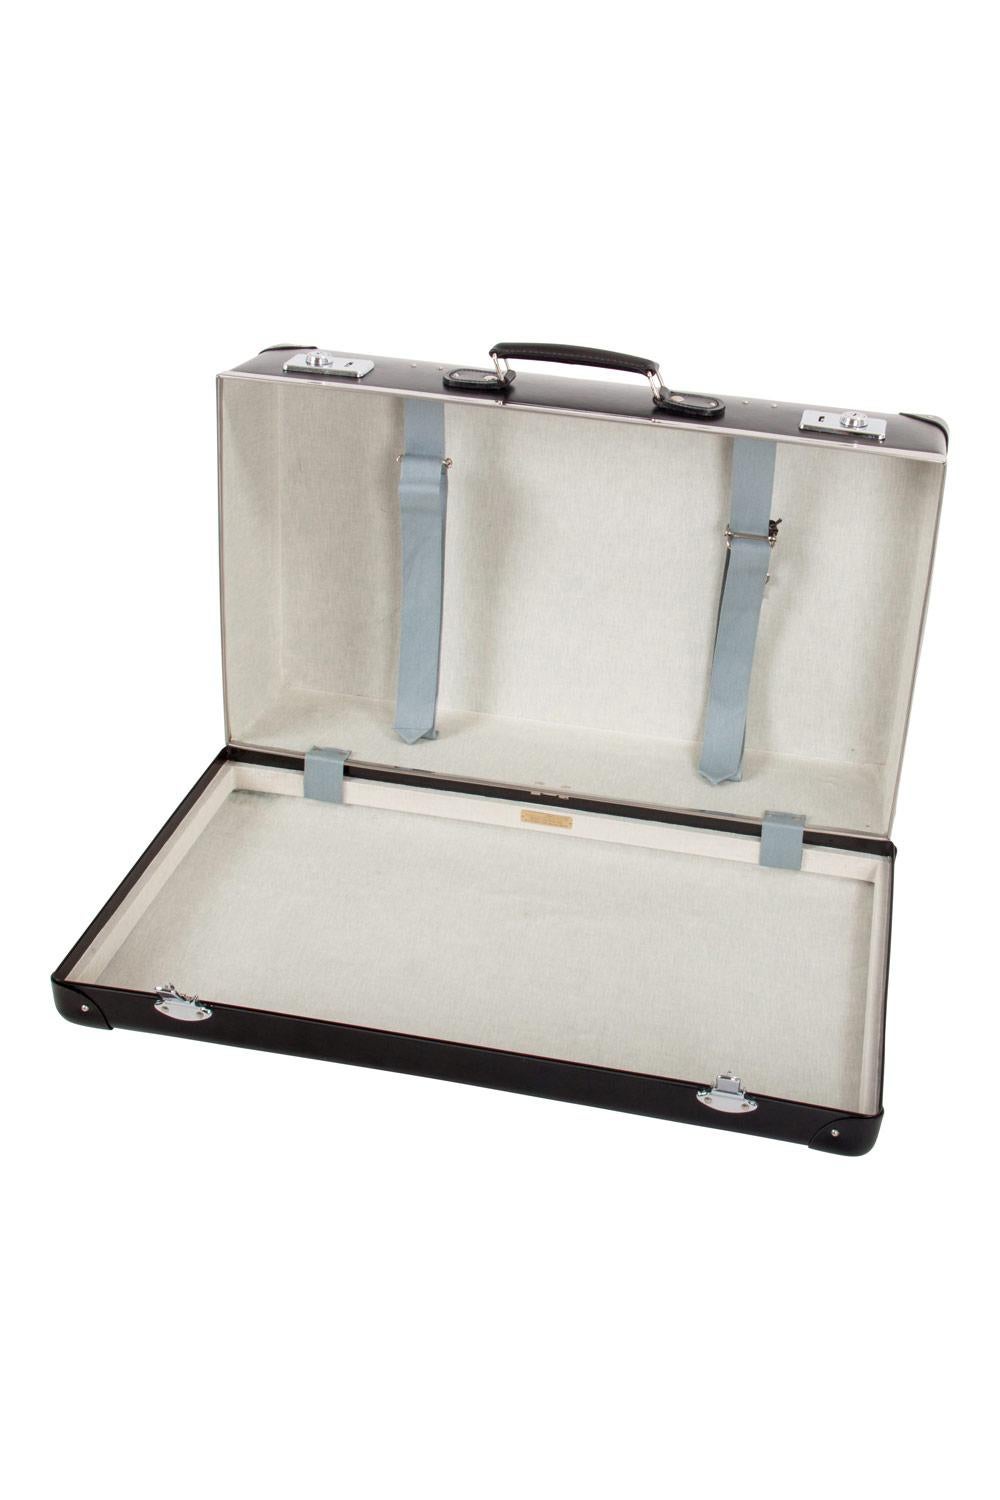 Travel in lavish luxury and unmatched style with this stunning Globe-Trotter luggage case. Designed in plastic and leather, the case has armoured corners and a key lock which adds a vintage touch. The spacious interior is lined with canvas and the